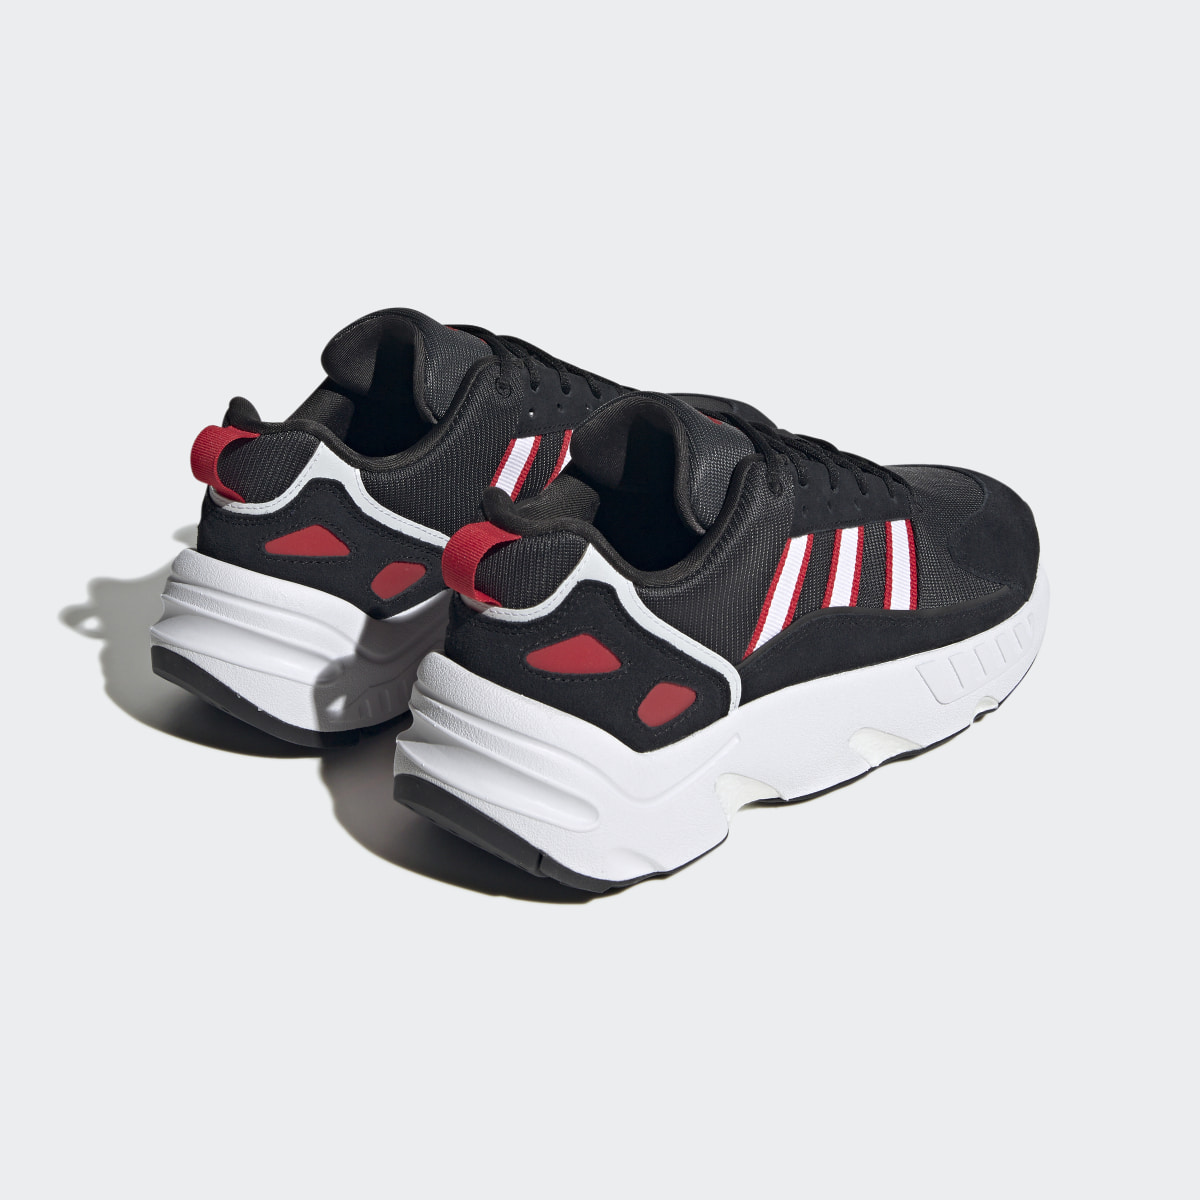 Adidas ZX 22 BOOST Shoes. 6